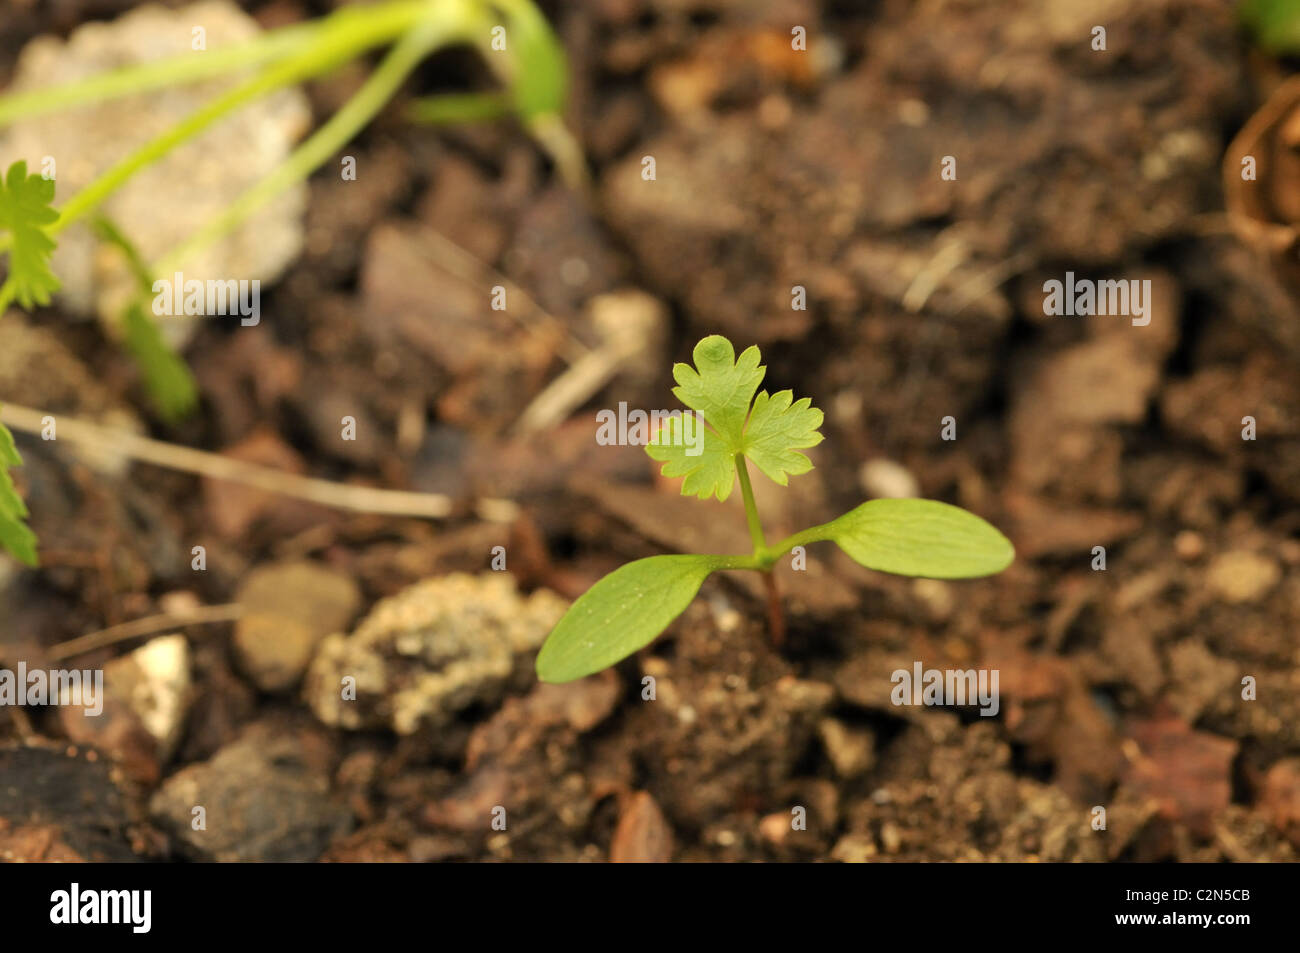 Two embryonic leaves or cotyledons and first true leaf of geranium. Stock Photo